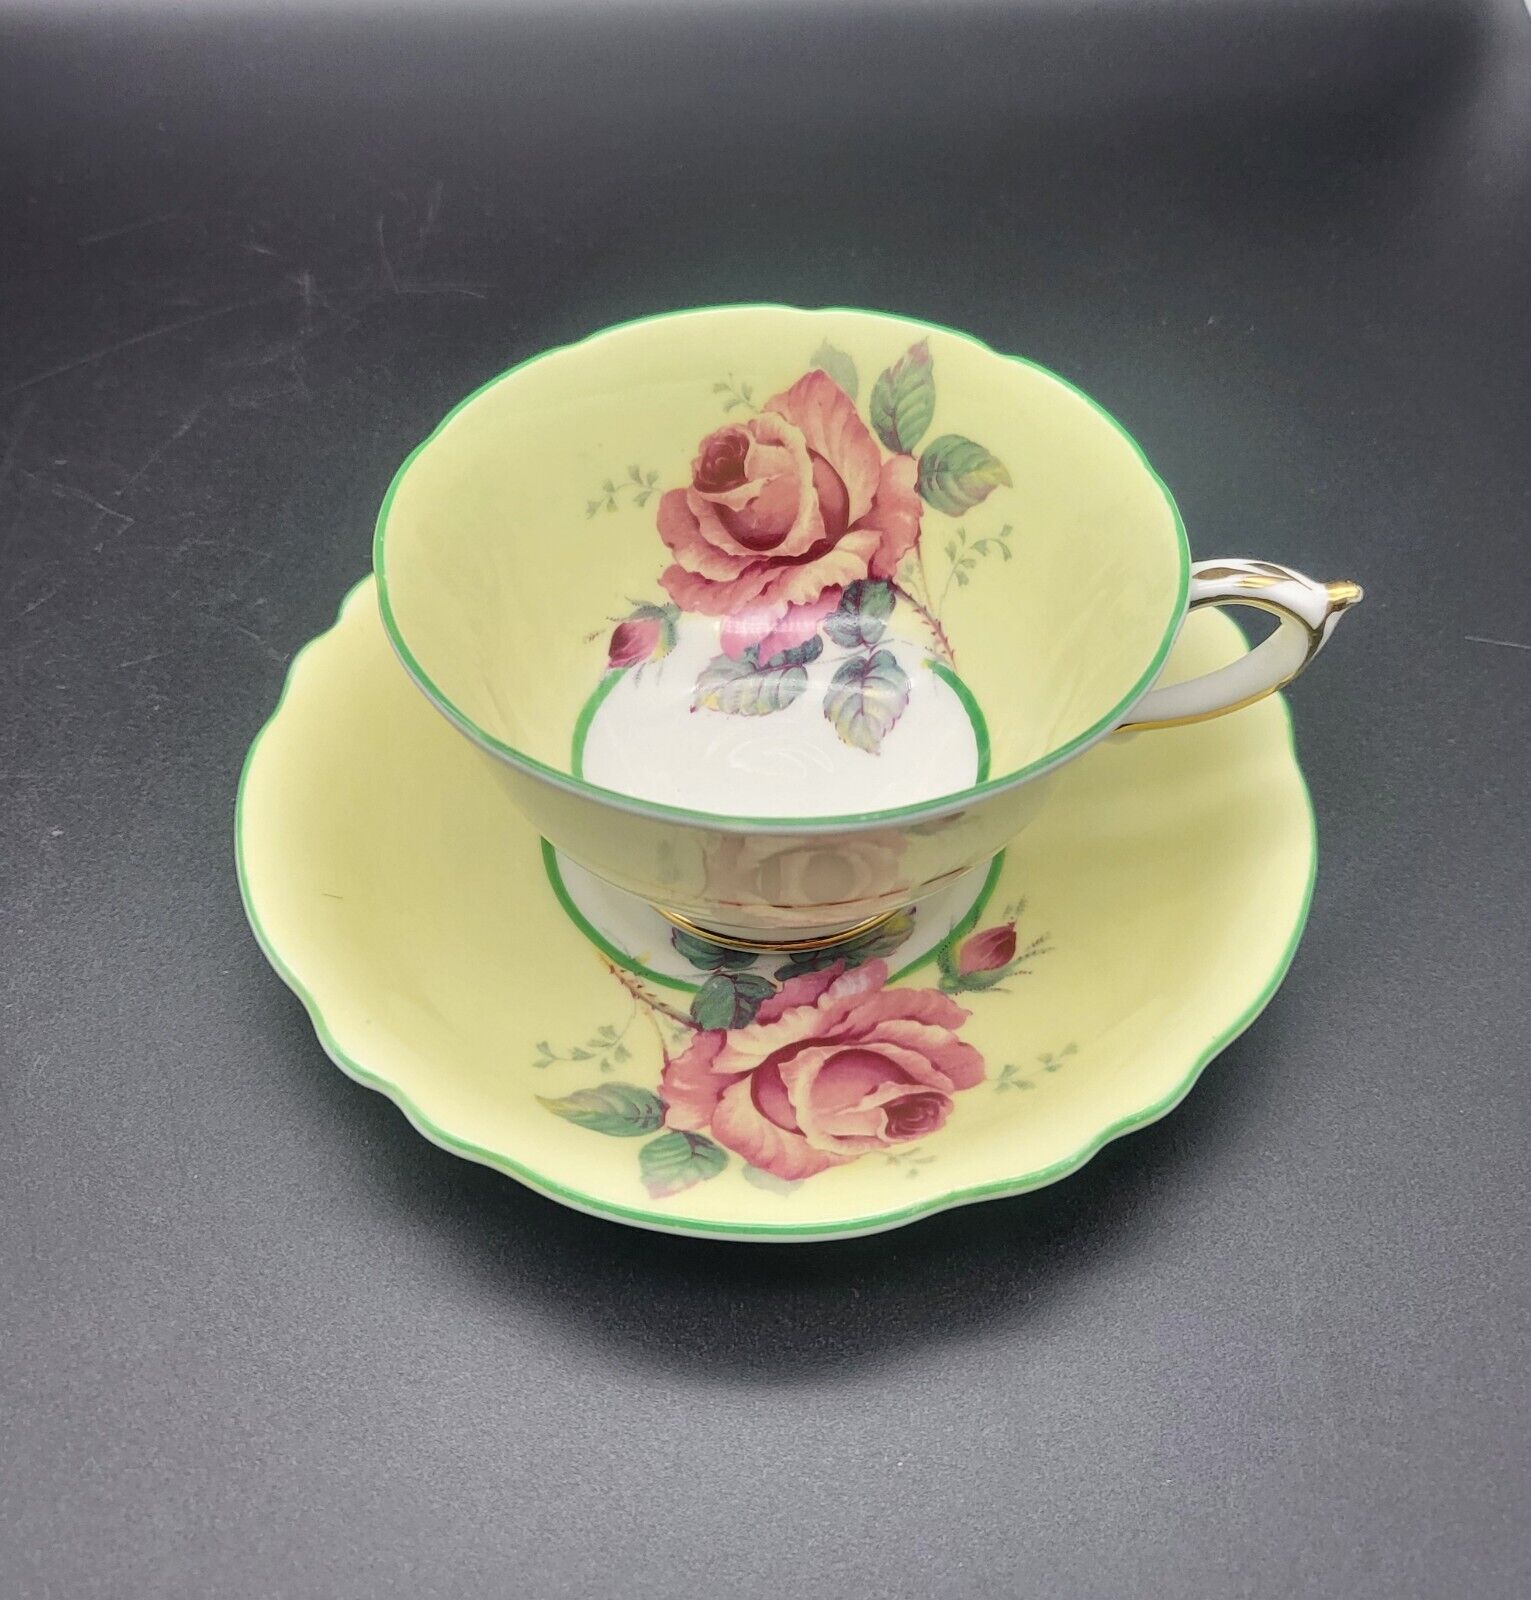 Paragon Double Warranted By Queen Mary Teacup Saucer Set Cabbage Rose 1939-1949